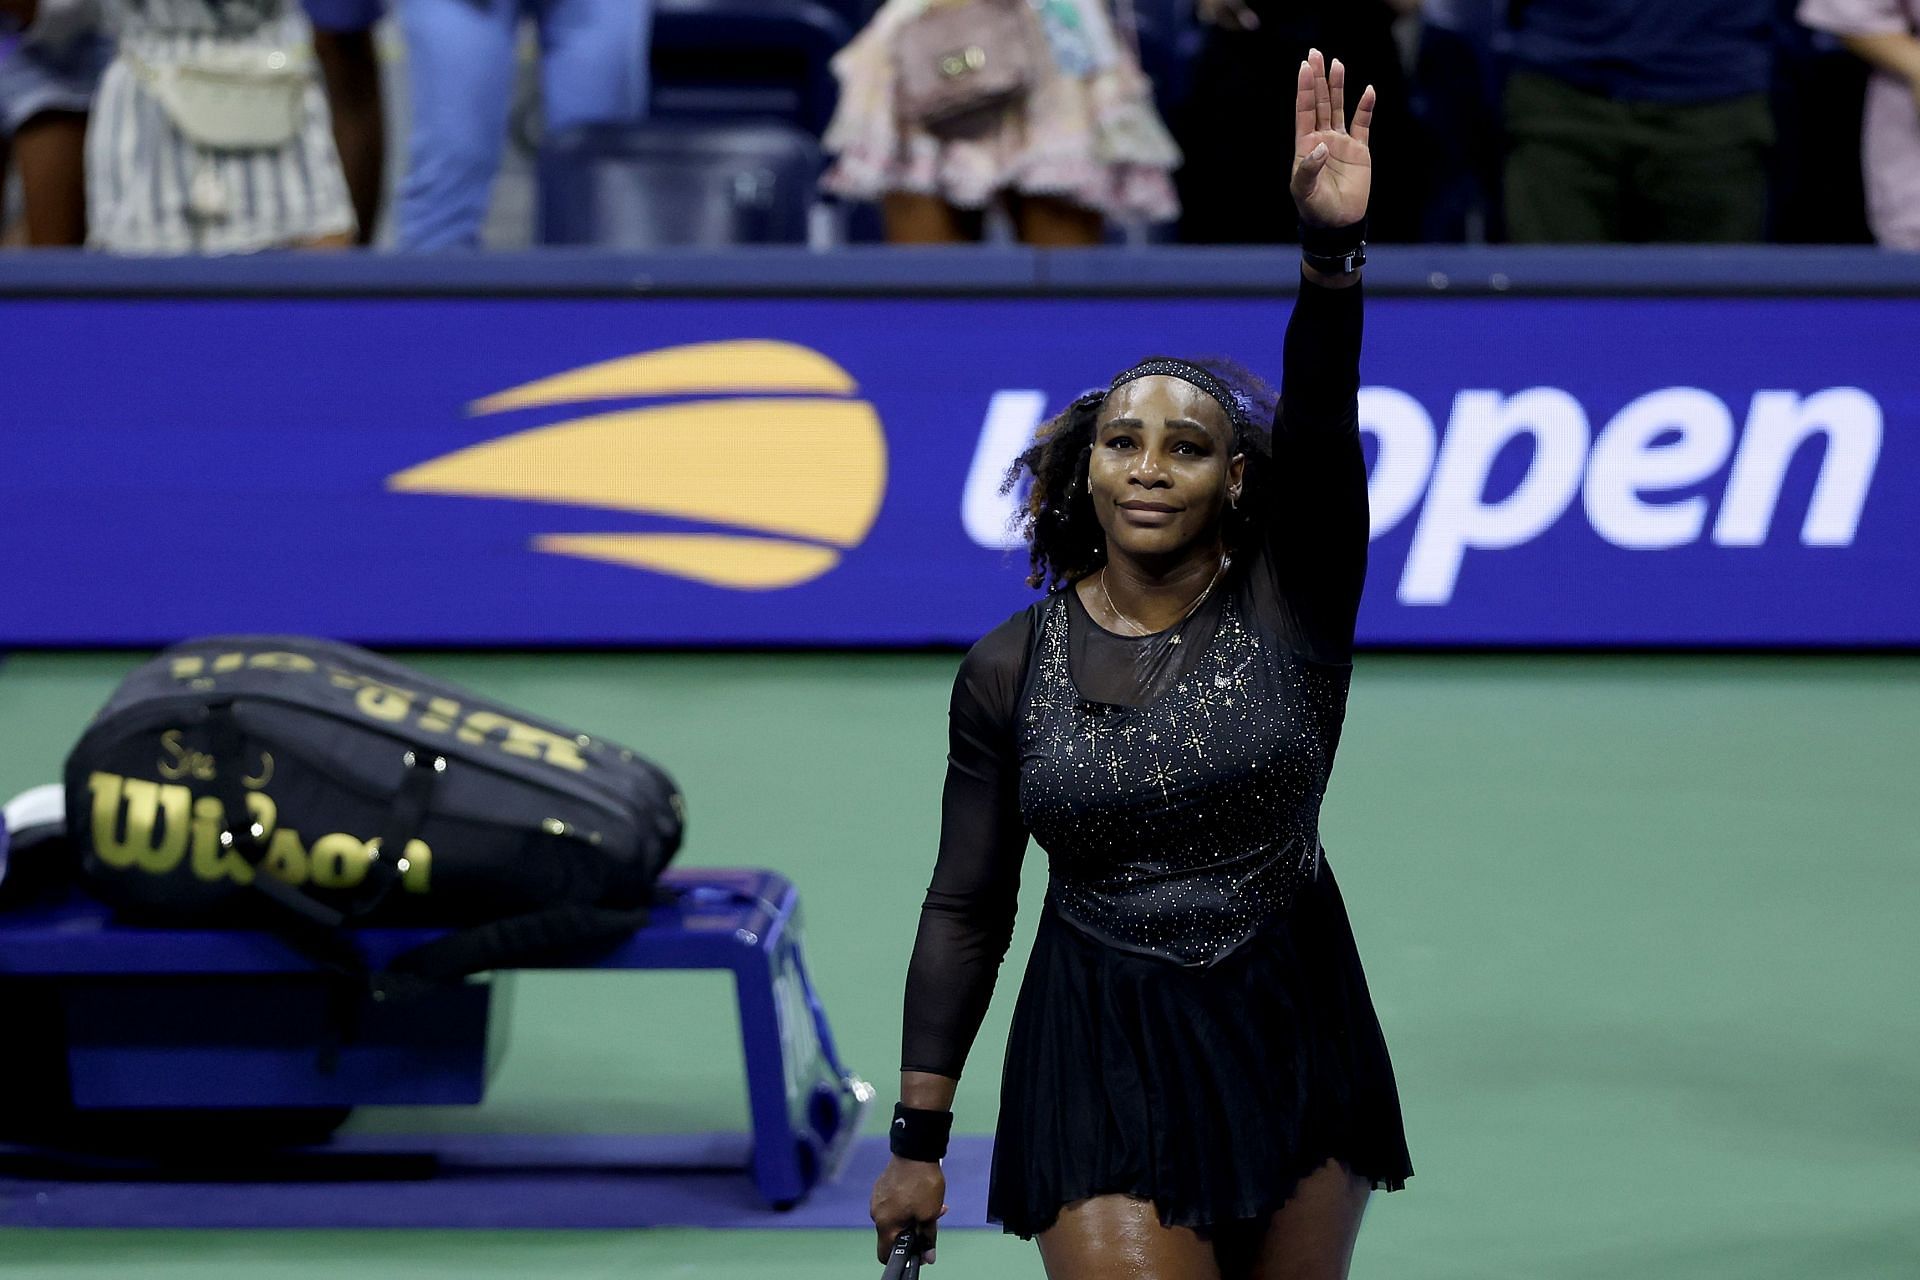 Serena Williams after her last match